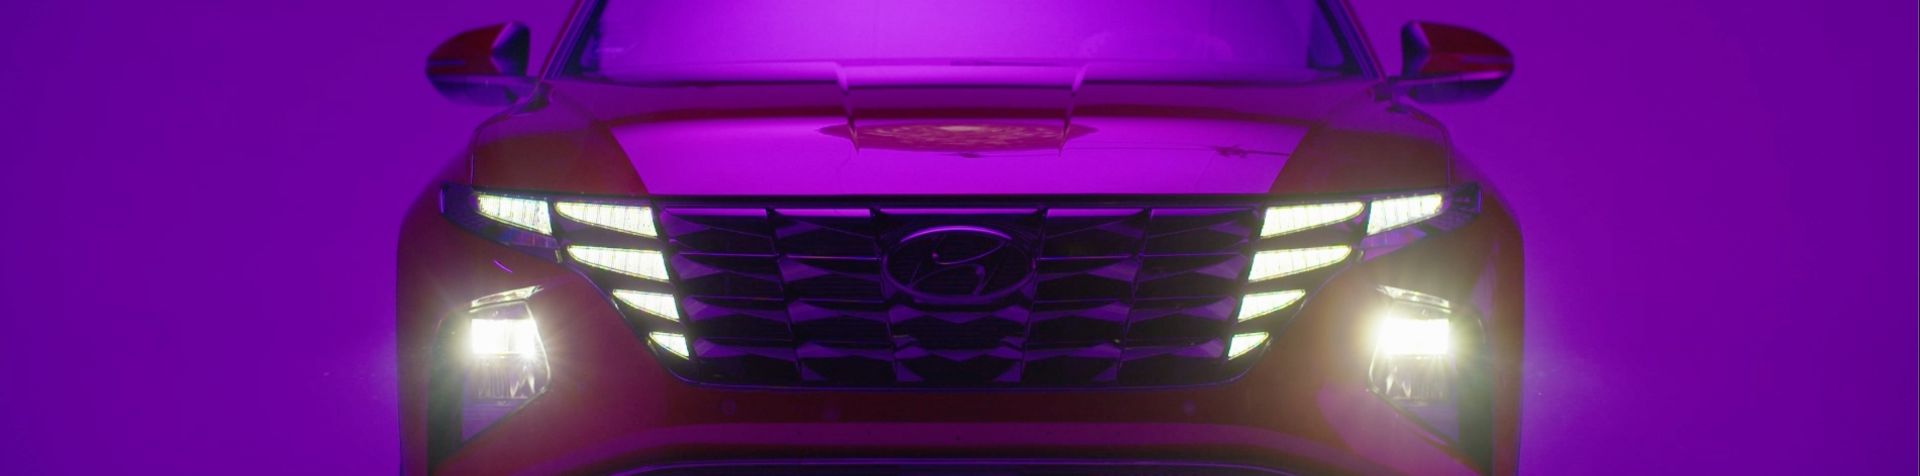 The front of a red TUCSON plug-in hybrid with its parametric headlights on against a purple background.